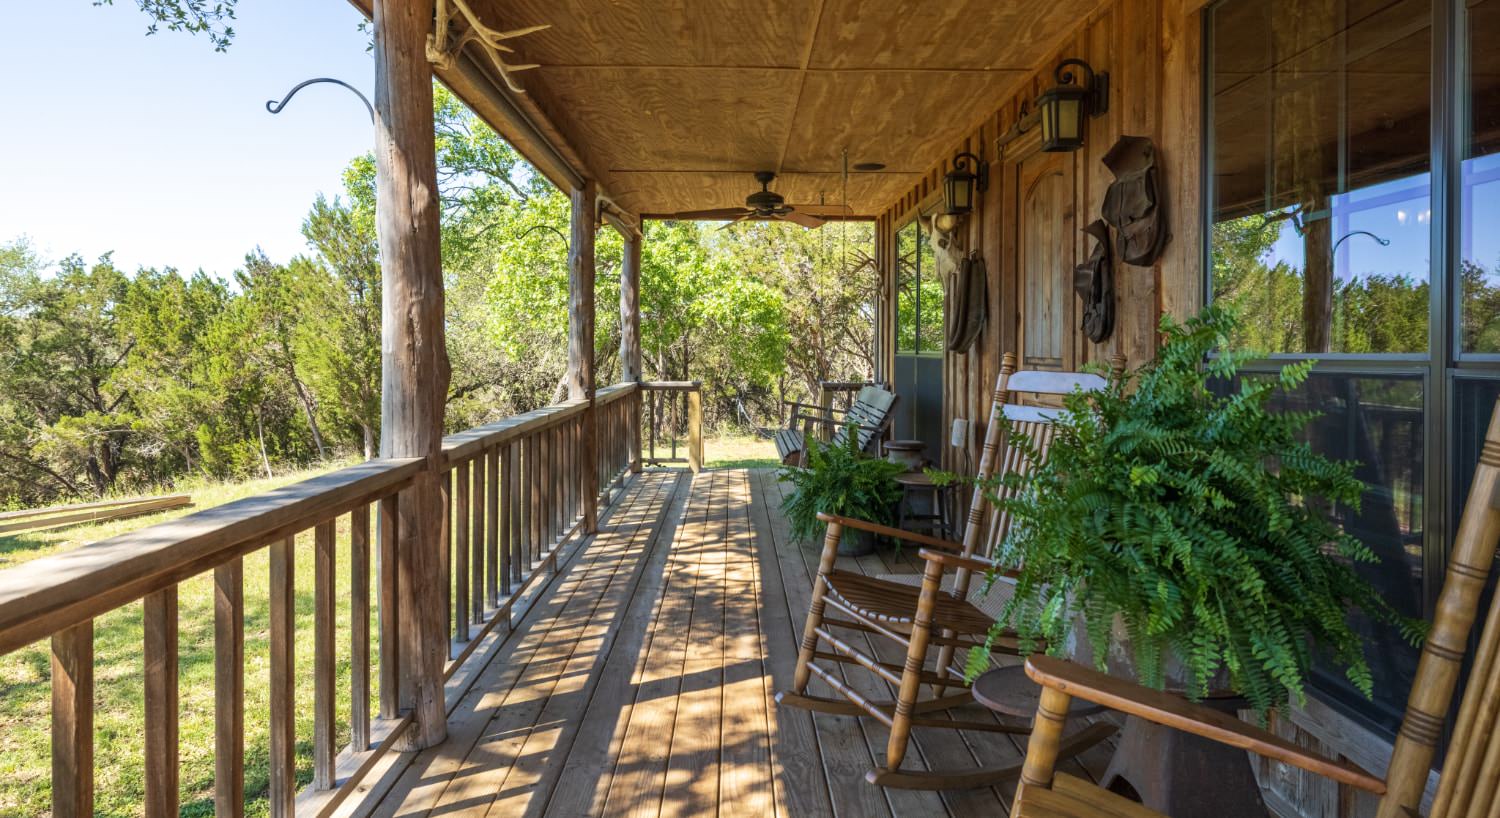 Exterioir view of the property's long wooden and covered front porch with wooden rocking chairs and views of large green trees